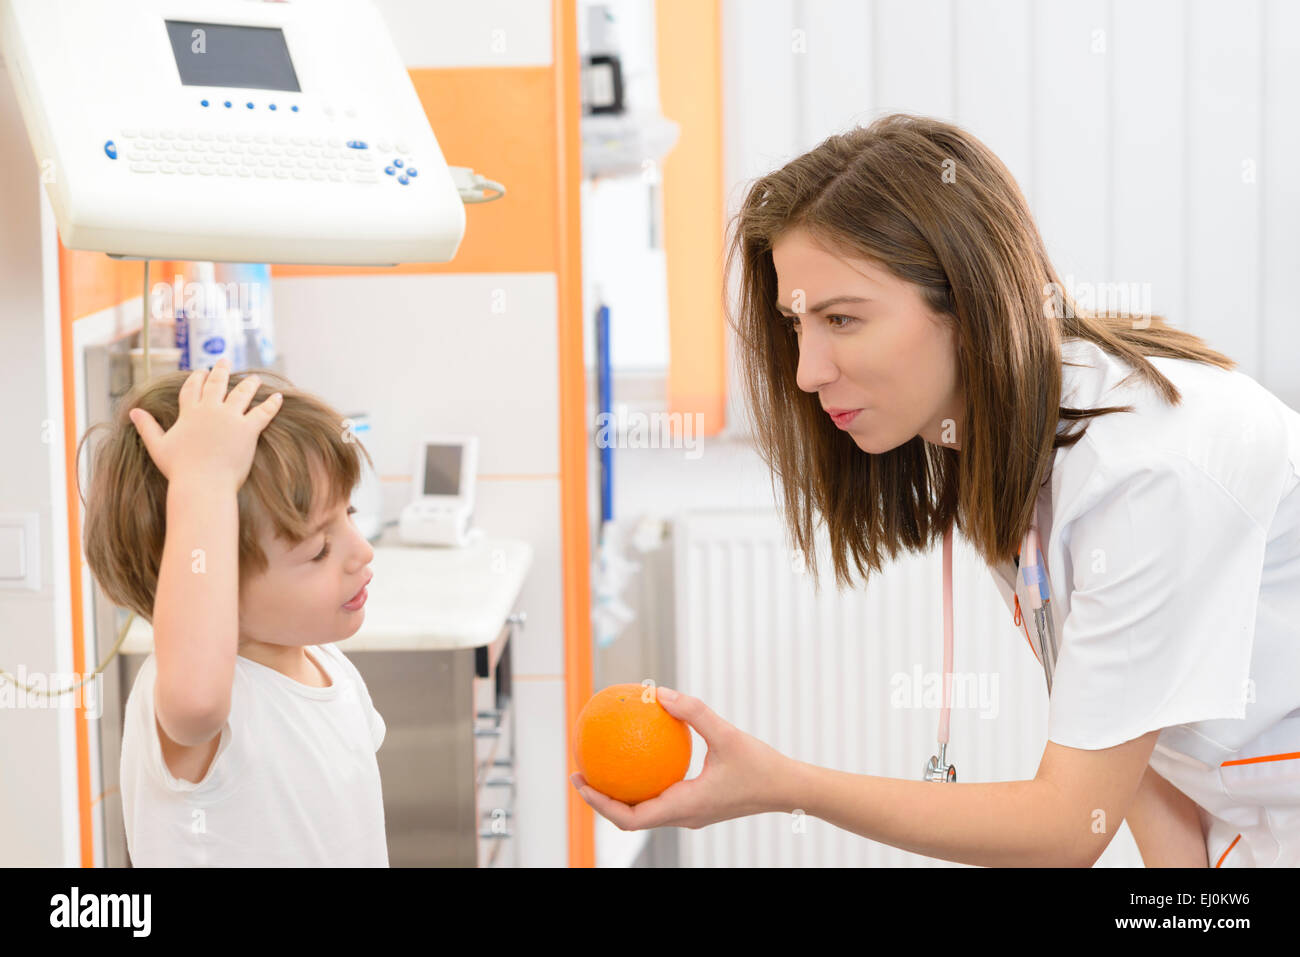 Angry kid refusing an orange at doctor visit Stock Photo